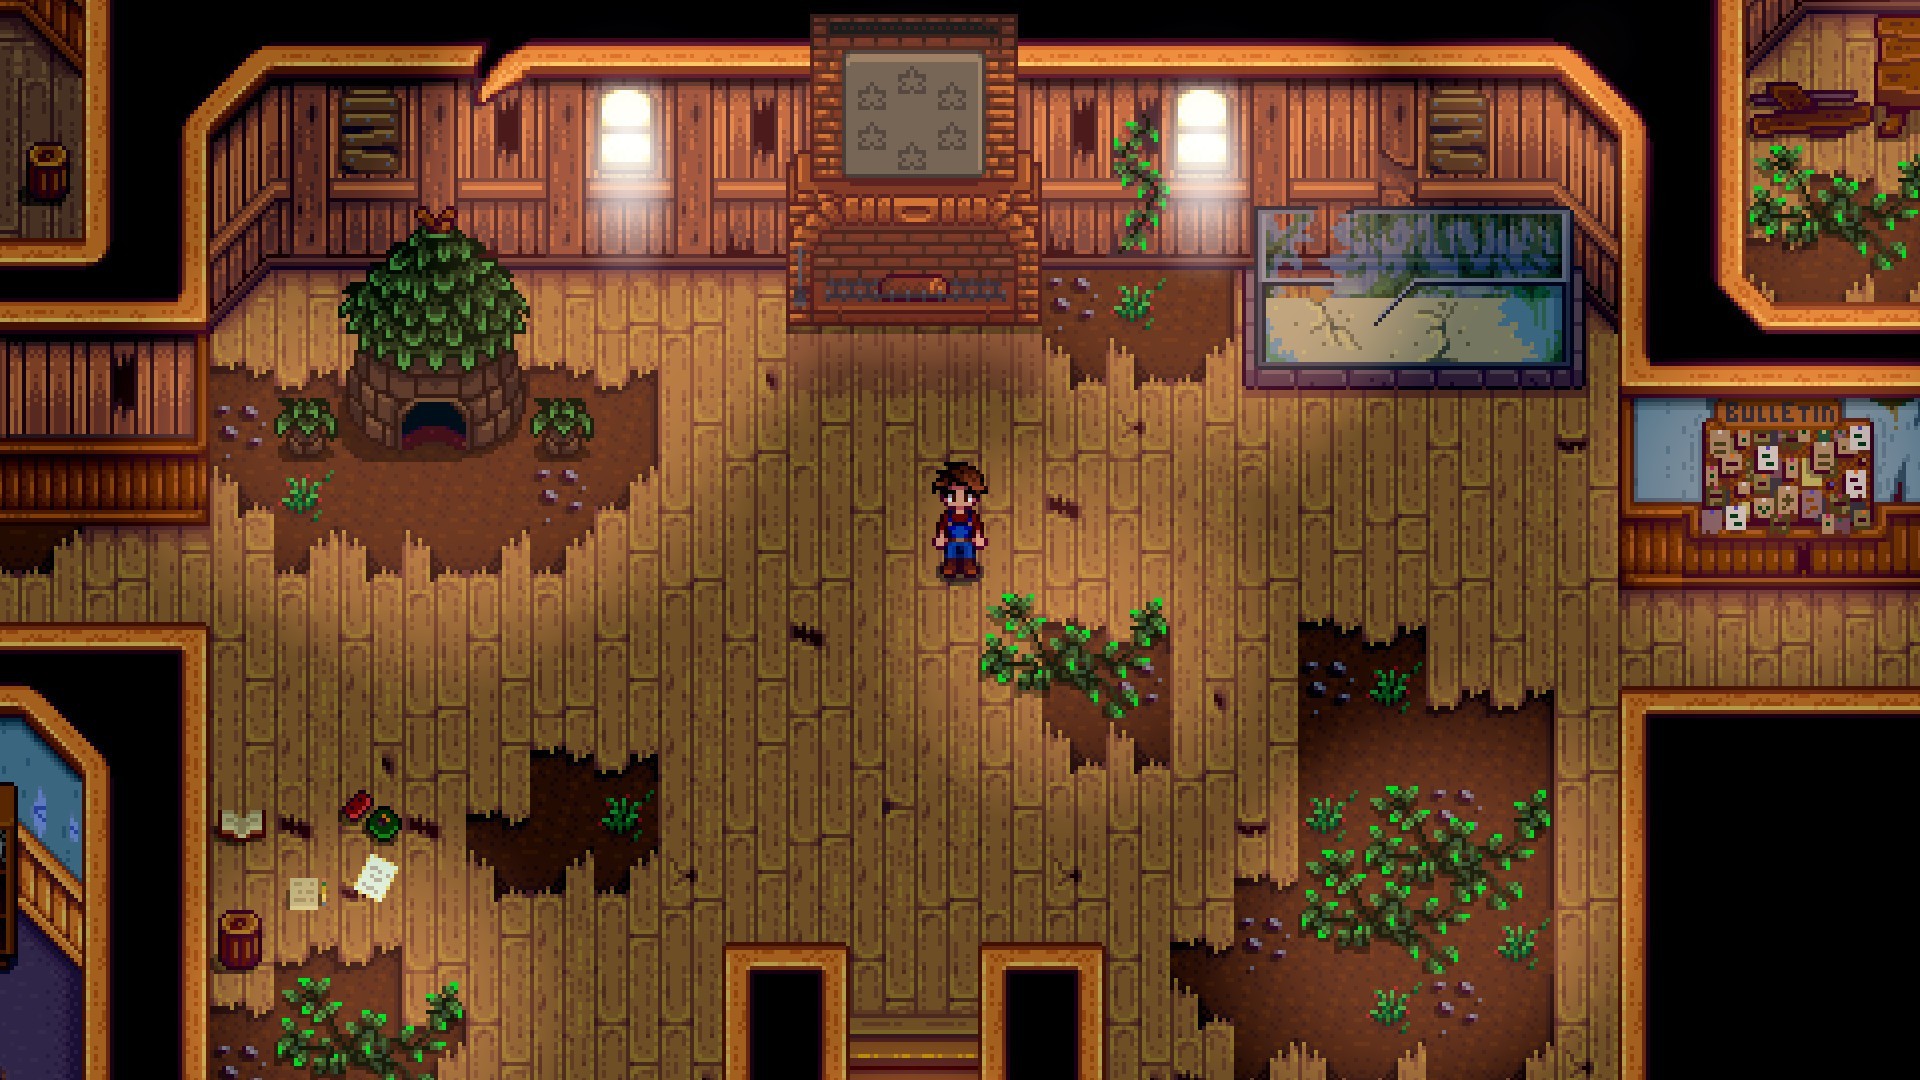 Stardew Valley Crossplay and Cross-progression: What Players Need to Know